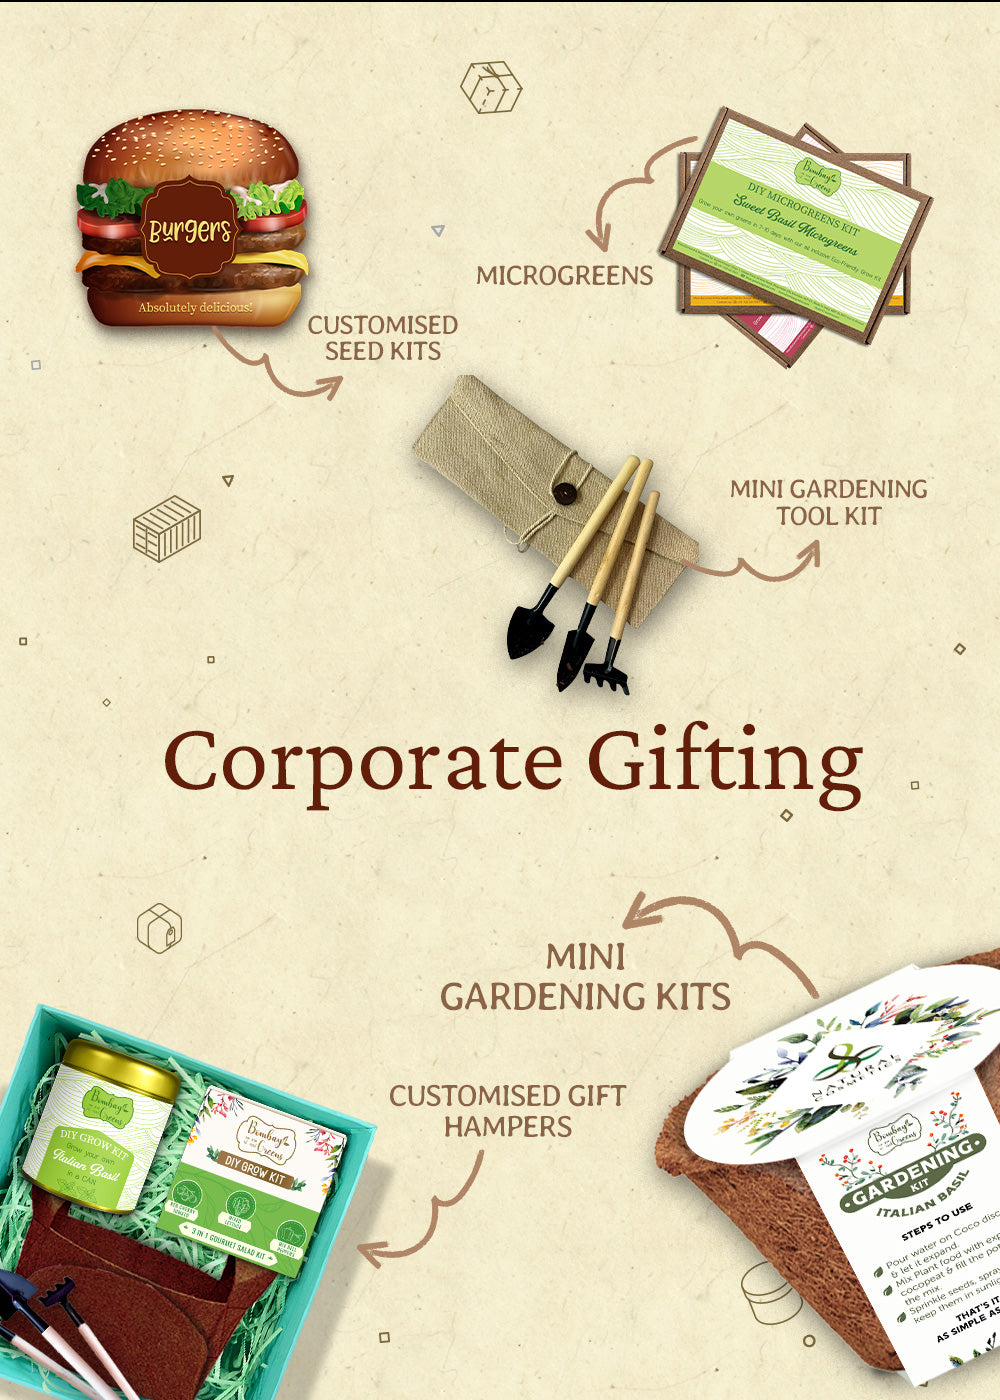 corporate gift items